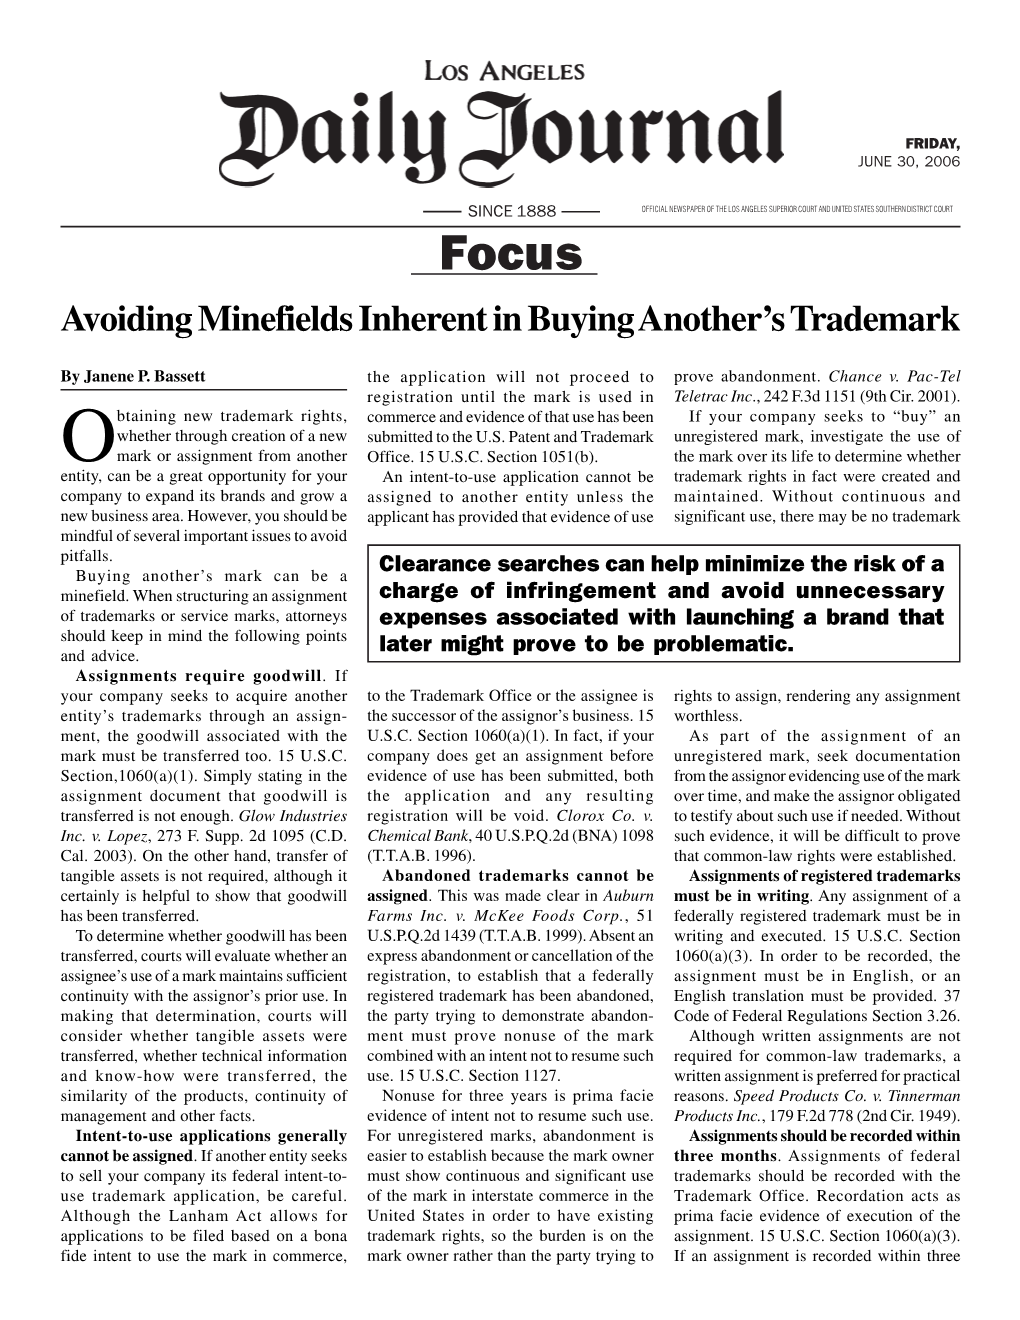 Avoiding Minefields Inherent in Buying Another's Trademark